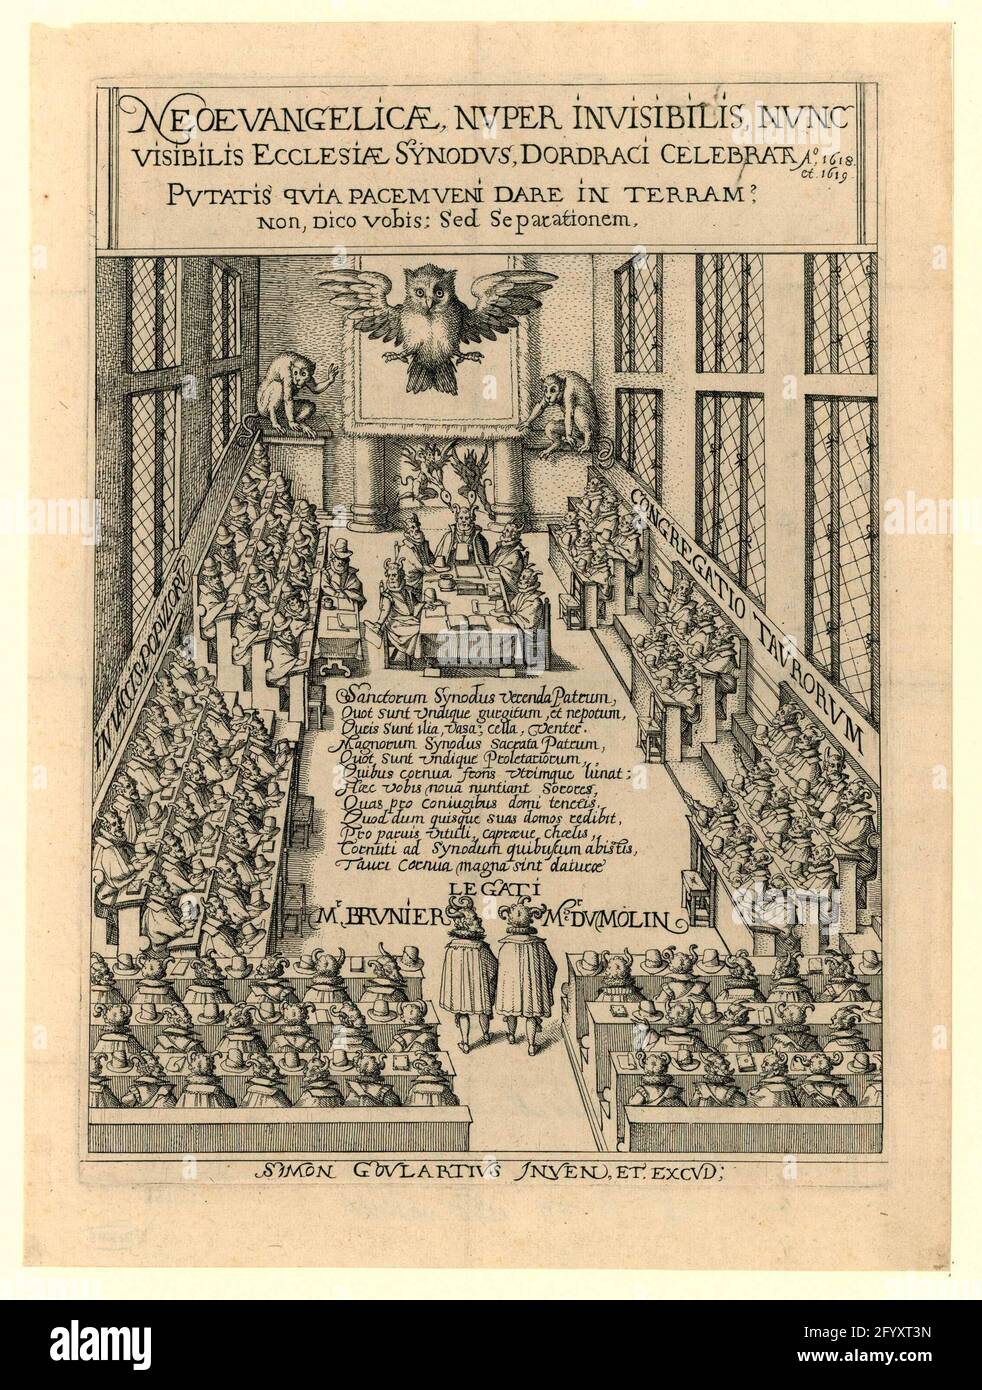 Cartoon on the Synod of Dordrecht, 1619; Neoevangelicae, Nuper Invisibilis,  Nunc Visibilis Ecclesiae Synodus, Dordraci Celebrata Ao. 1618 ET 1619.  Cartoon on the national synod in Dordrecht in 1618-1619. In the show